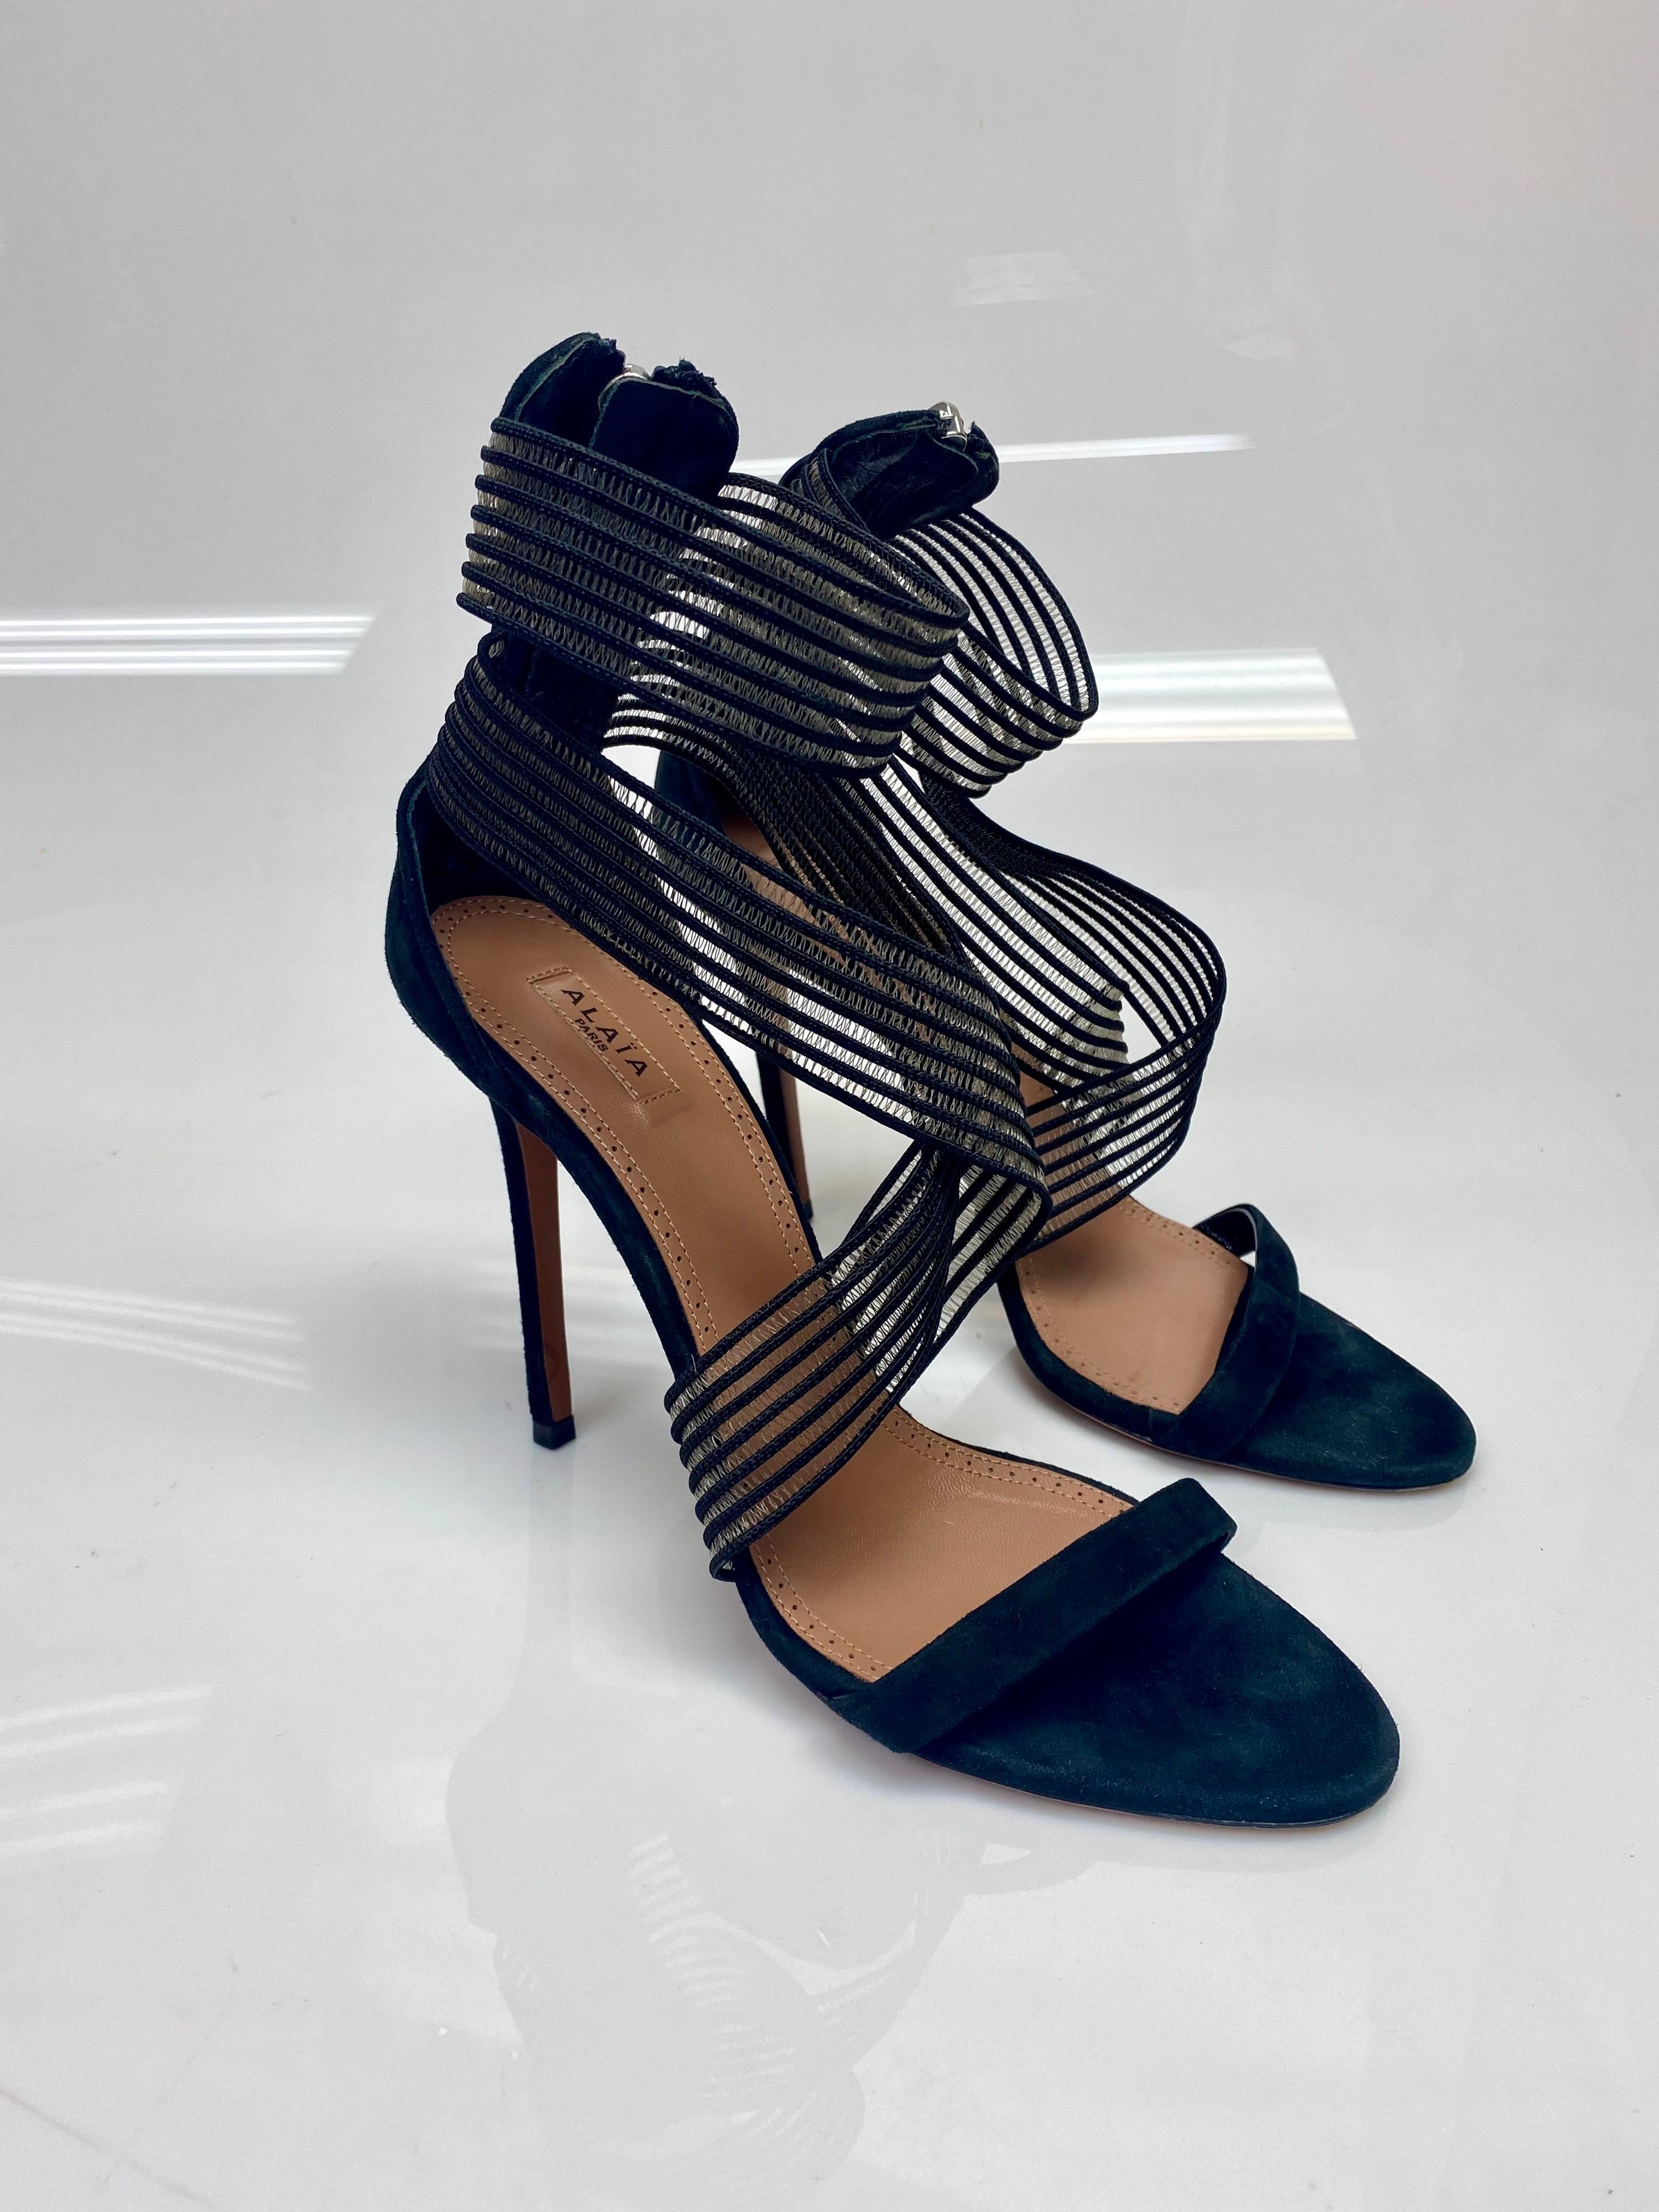 Alaia Black Suede Ribbon Sandals Heels Size 40. Azzedine Alaïa suede ribbon sandals have been crafted in Italy from black suede and finished with a beautiful striped detailing around the middle, and top of the shoe to compliment any outfit. Item is